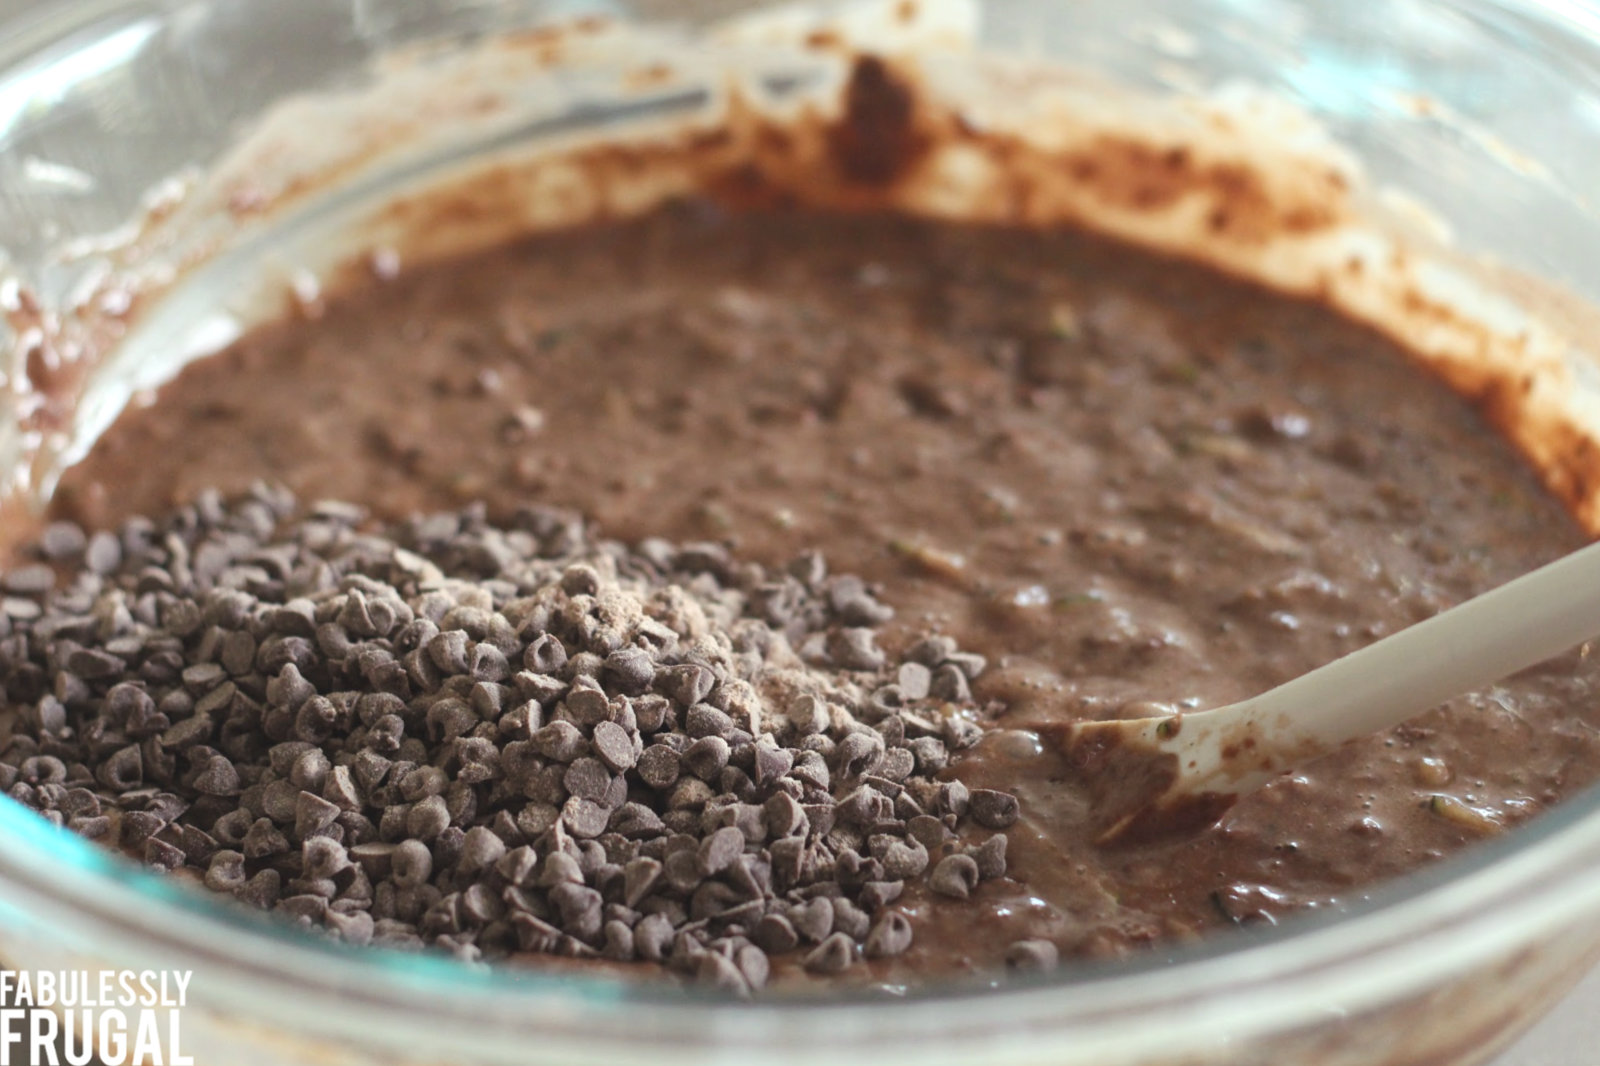 Mixing chocolate chips into chocolate zucchini batter